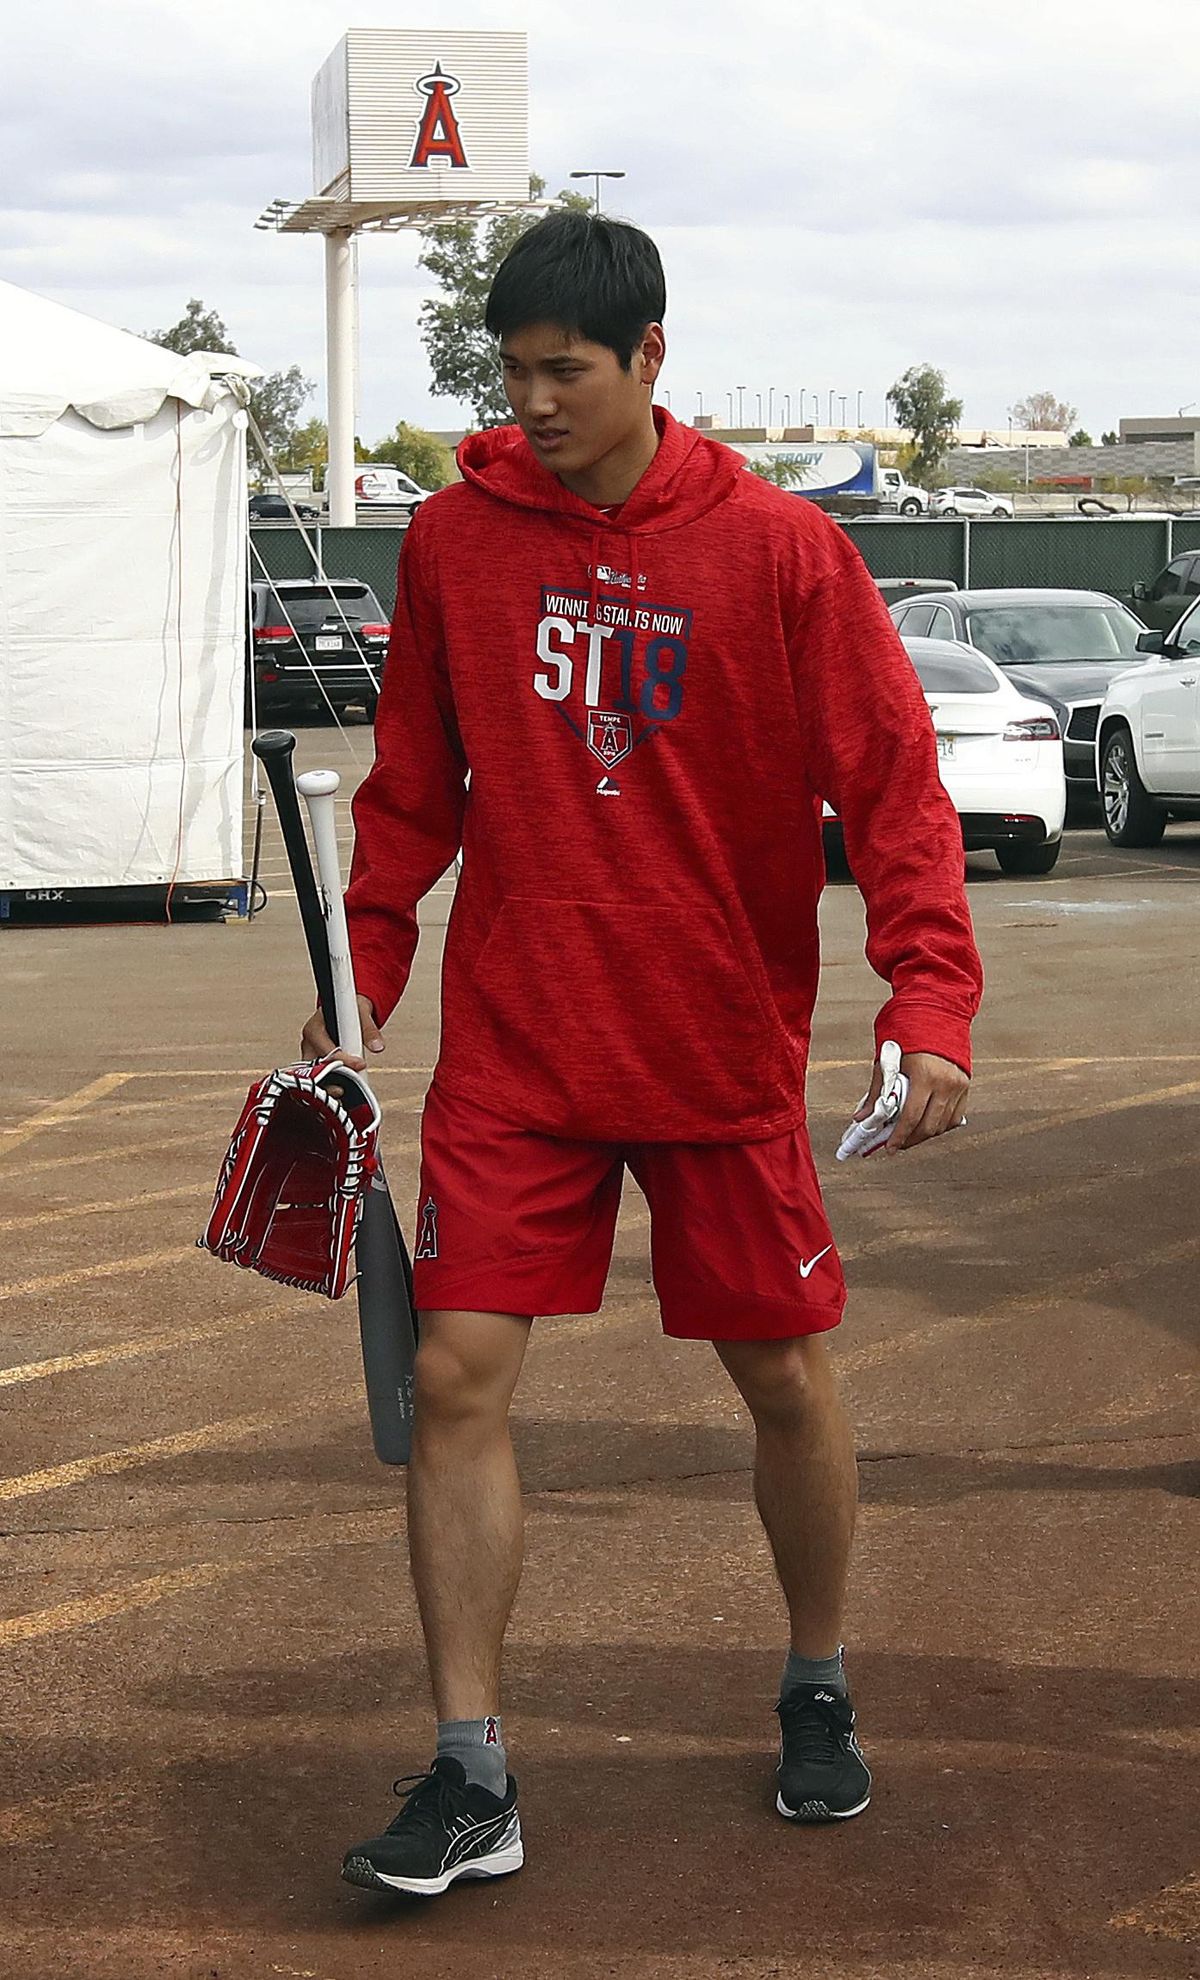 Los Angeles Angels’ Shohei Ohtani walks from the batting cage during a spring training baseball practice on Tuesday, Feb. 13, 2018, in Tempe, Ariz. (Ben Margot / Associated Press)